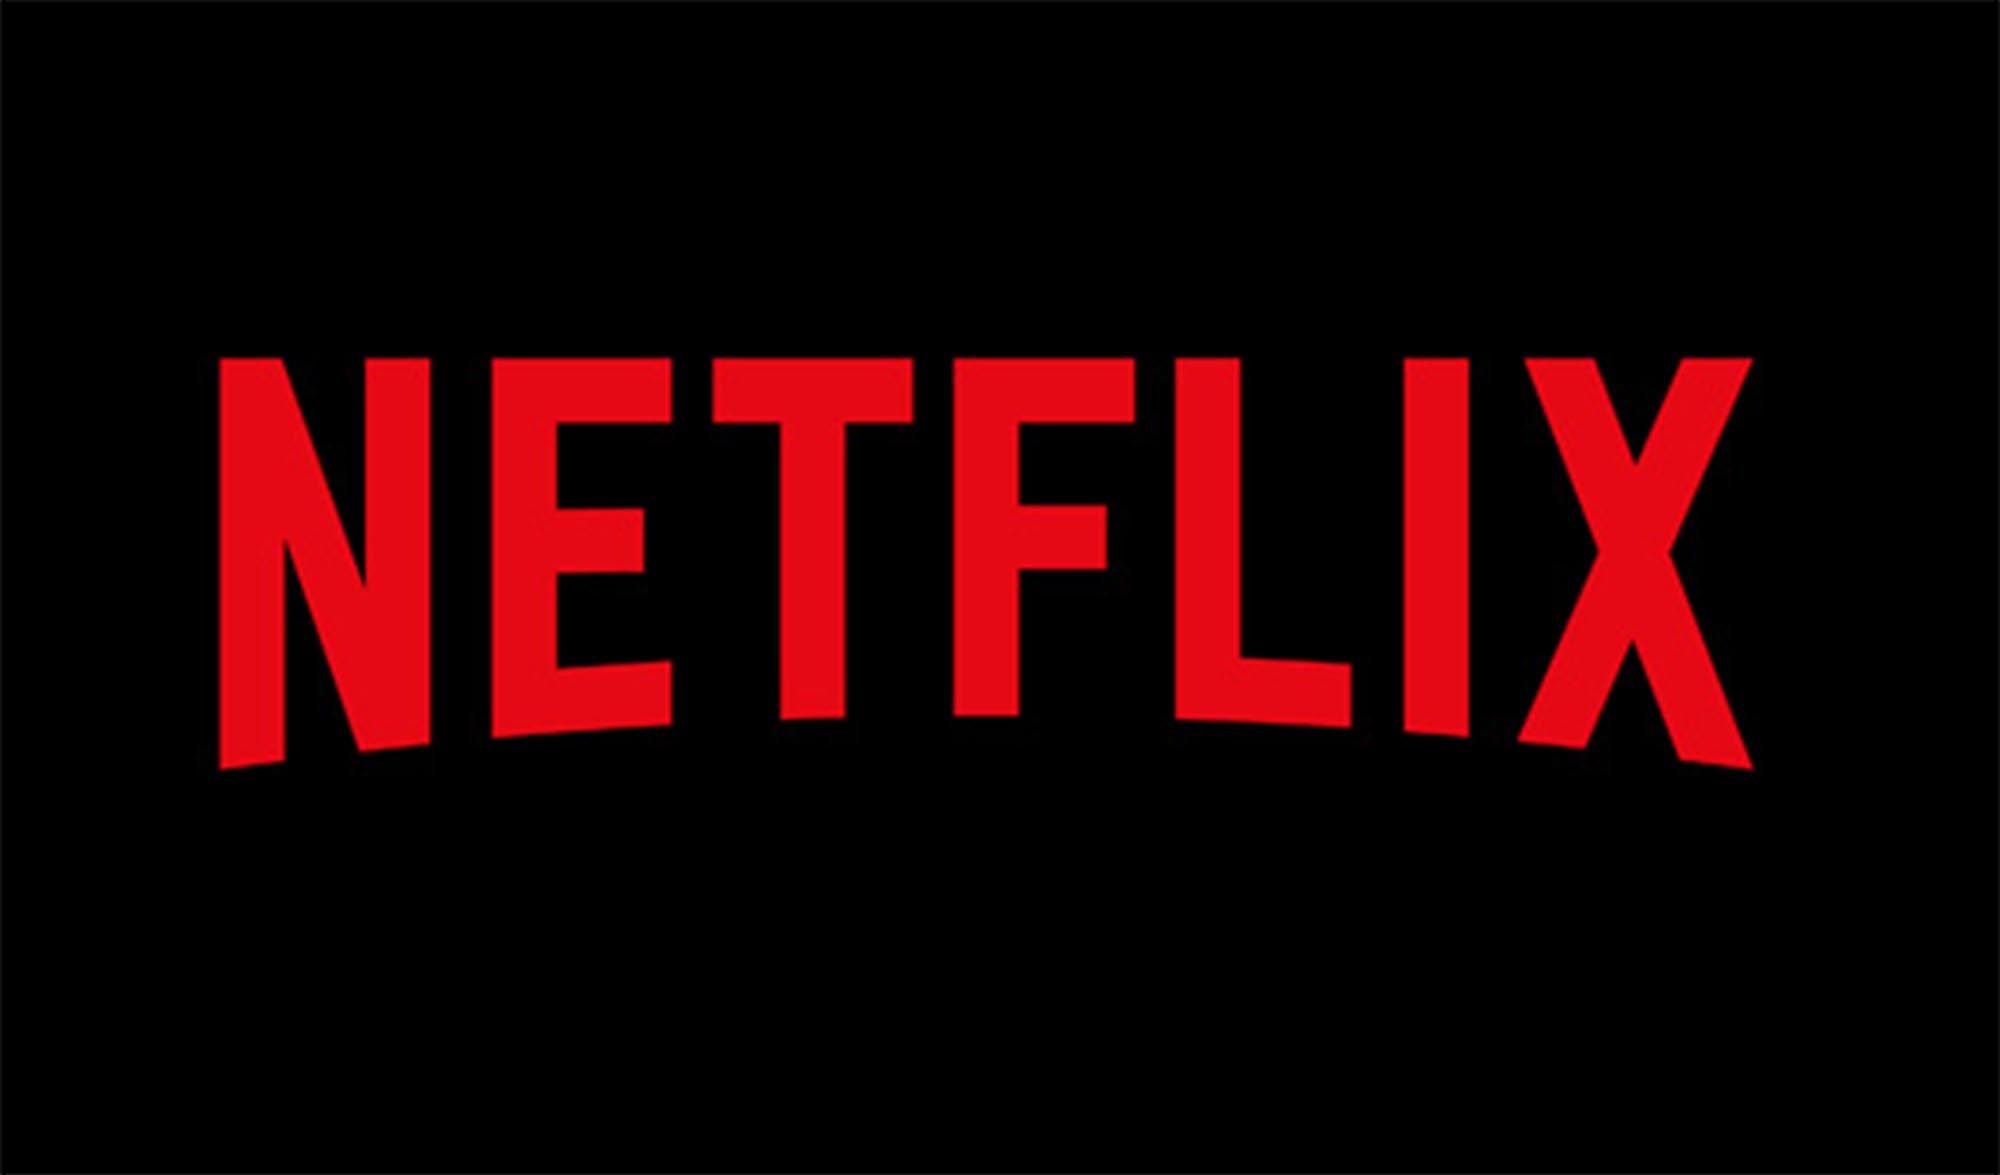 Sharing a Netflix account could get a lot more difficult